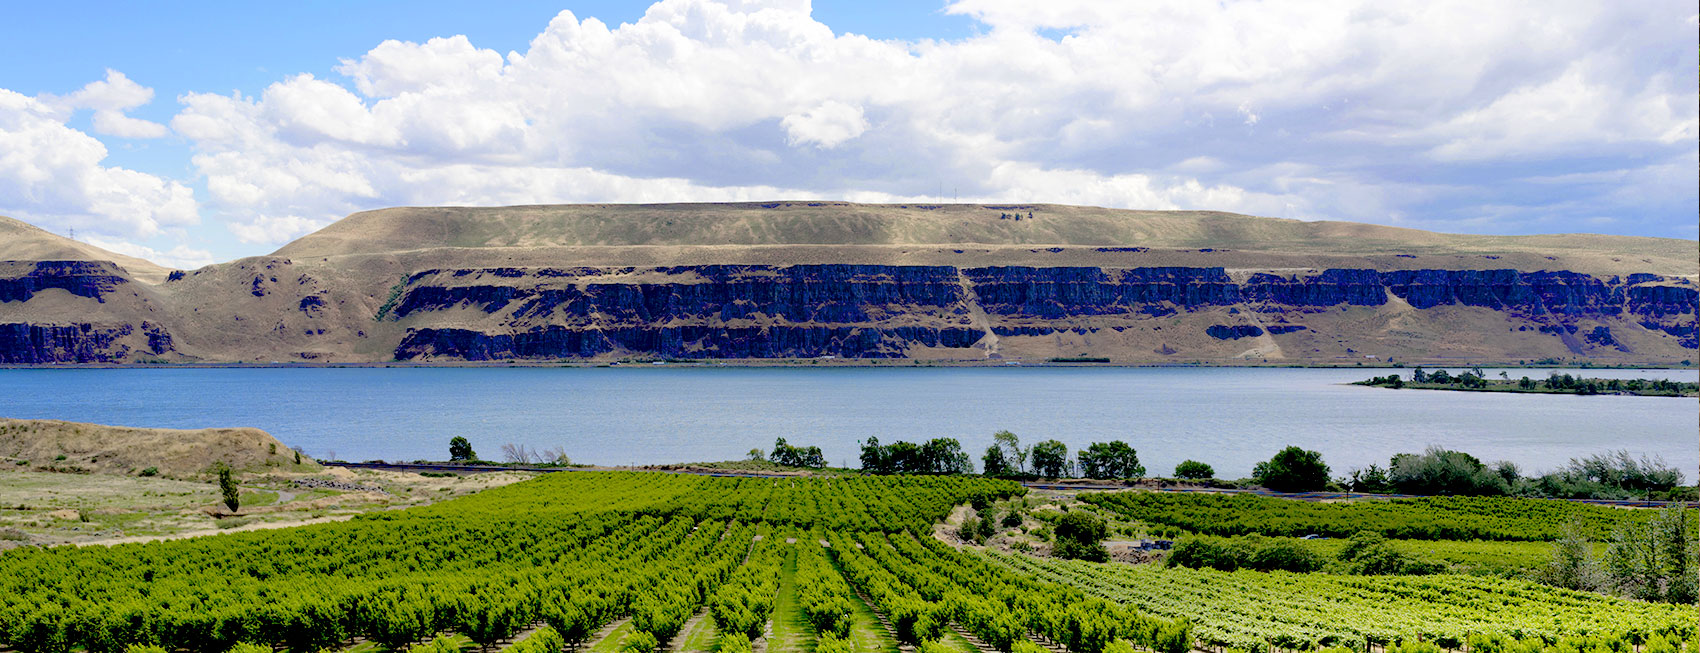 Columbia River Basin orchards